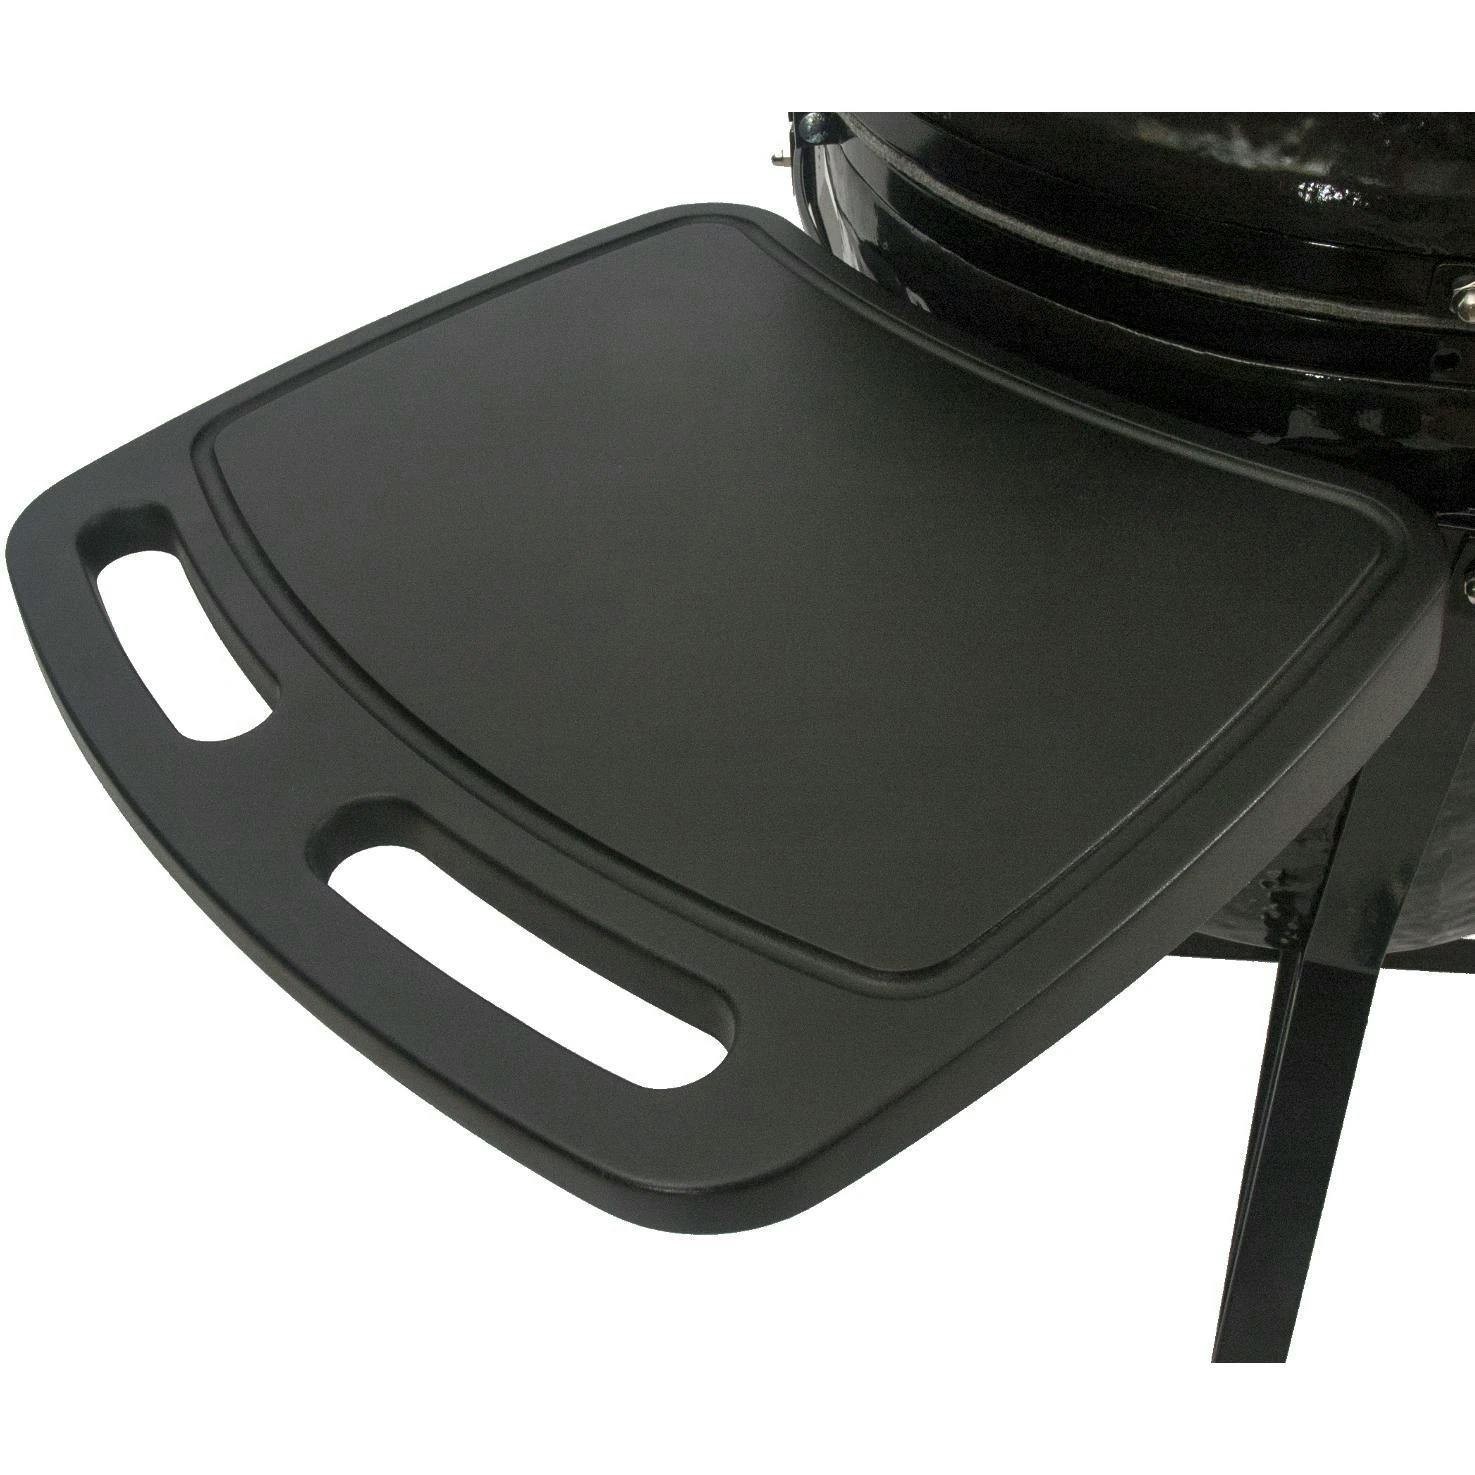 Primo All-In-One Oval Ceramic Kamado Grill with Cradle, Side Shelves and Stainless Steel Grates